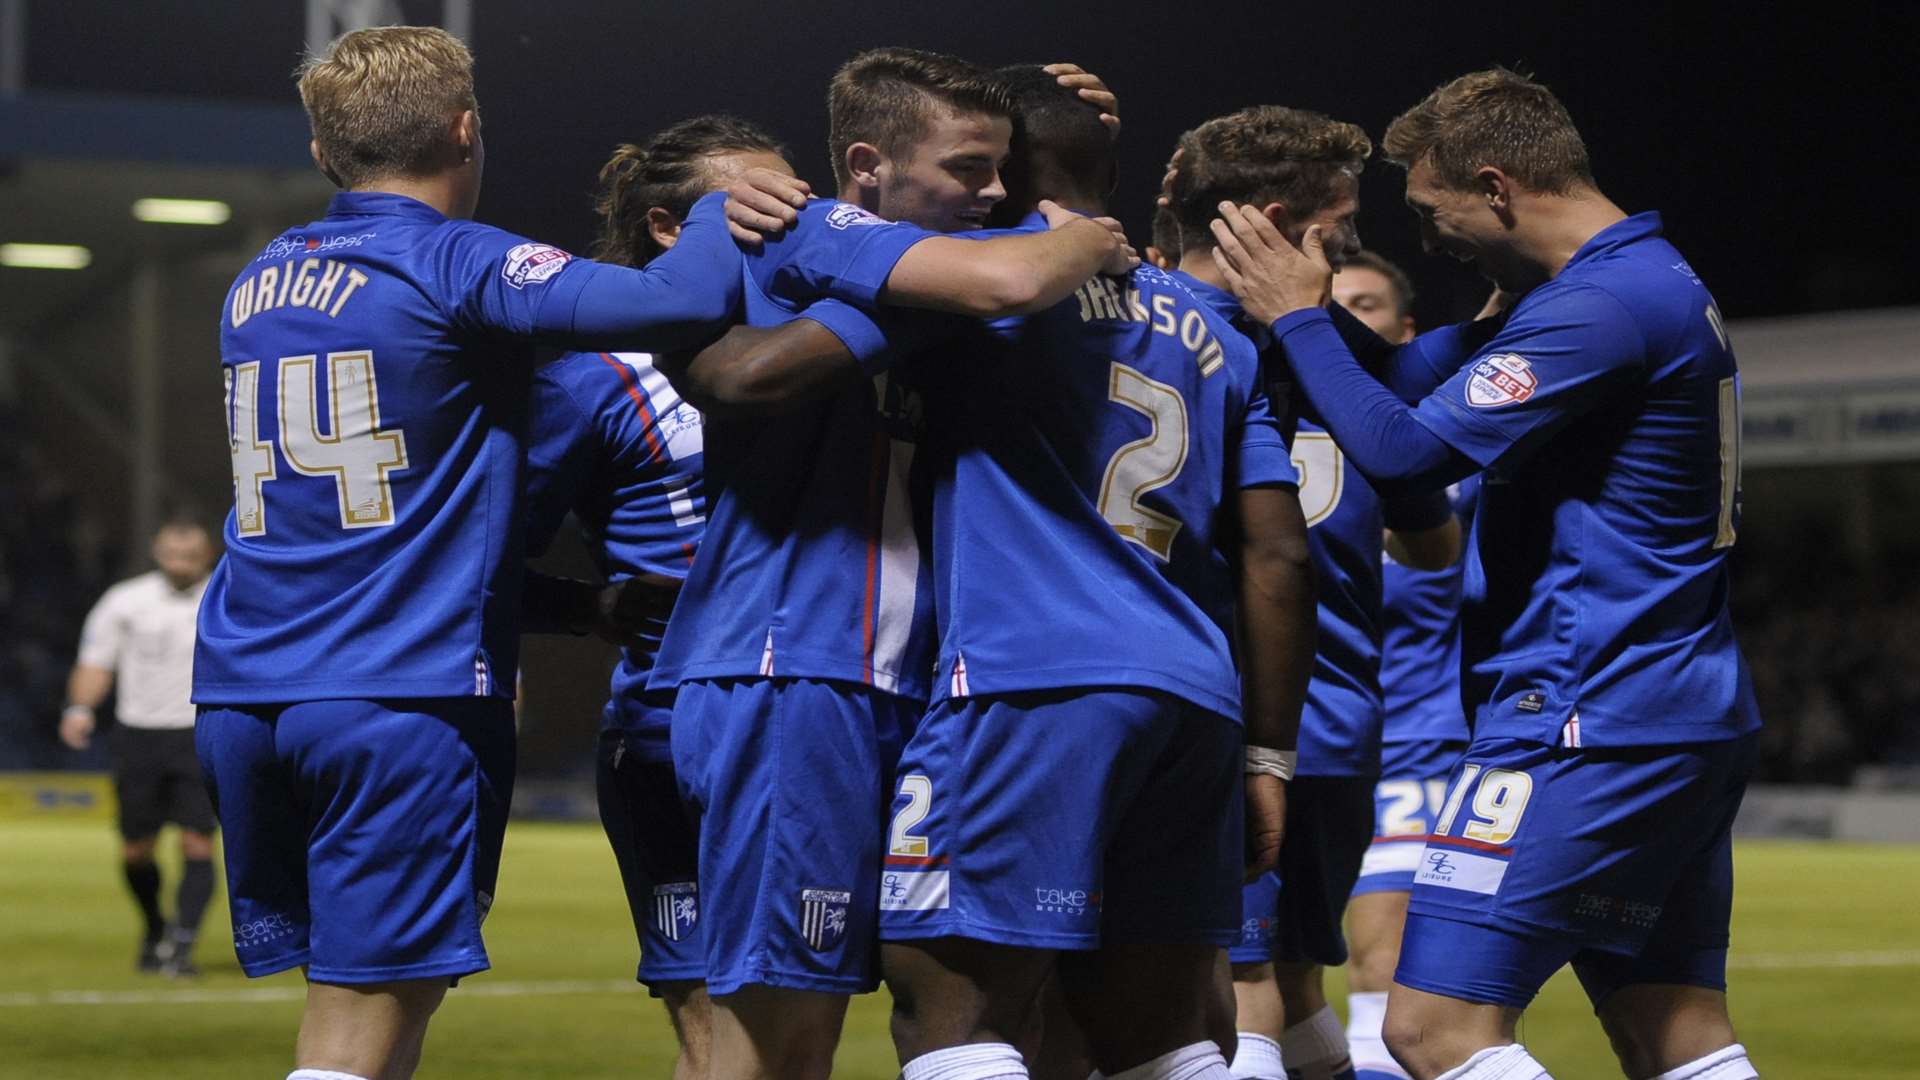 Fleetwood's lead disappears as Gills celebrate Jordan Houghton's 28th-minute strike - the first of three goals in six minutes...